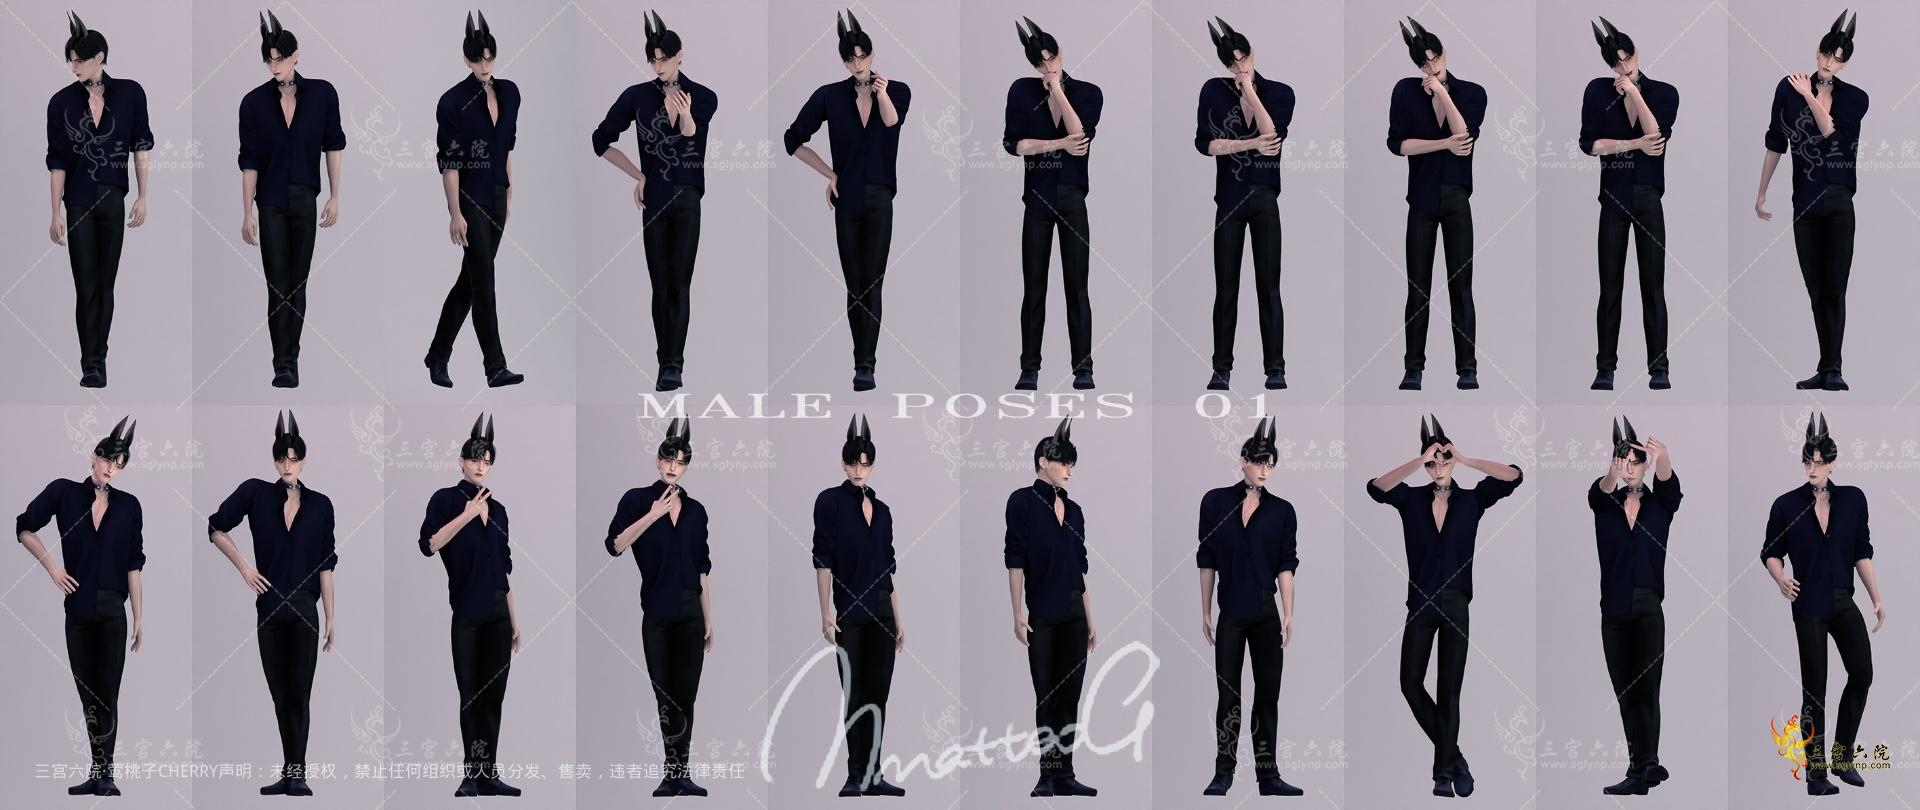 MmatteoG_Male Poses 01_CAStrait_catlover.png